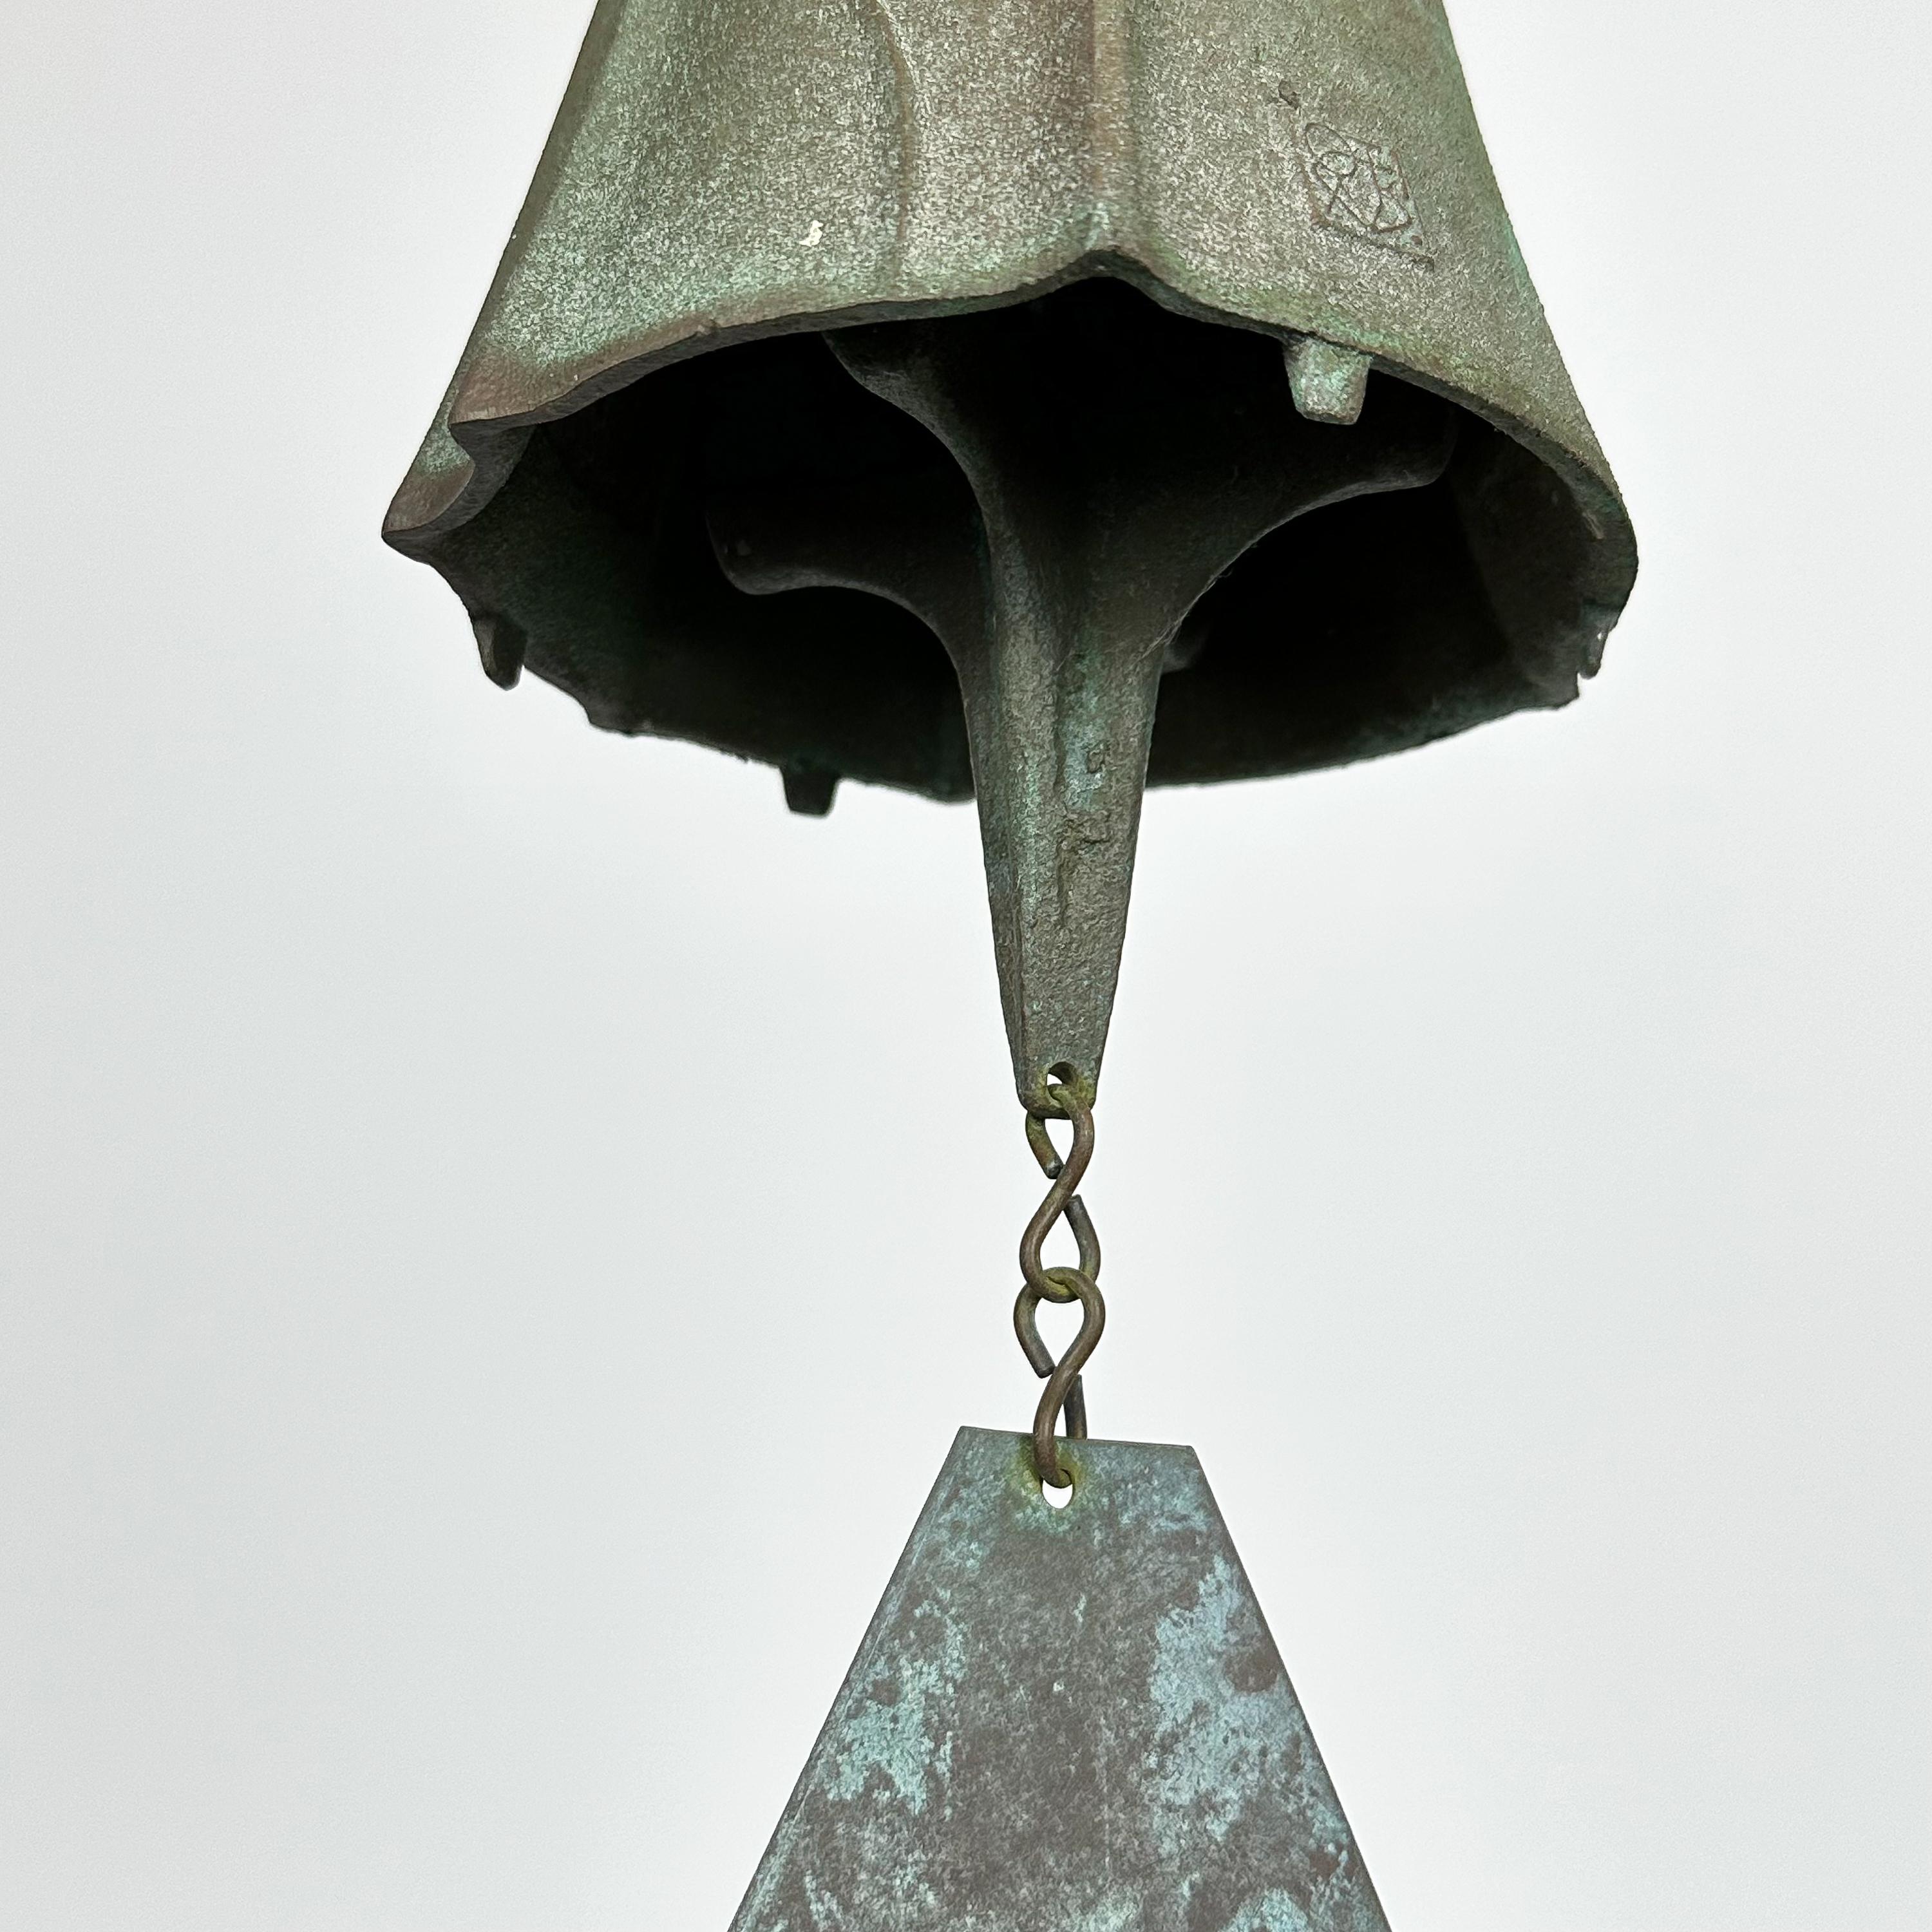 Late 20th Century Mid-Century Bronze Bell / Wind Chime by Paolo Soleri for Arcosanti